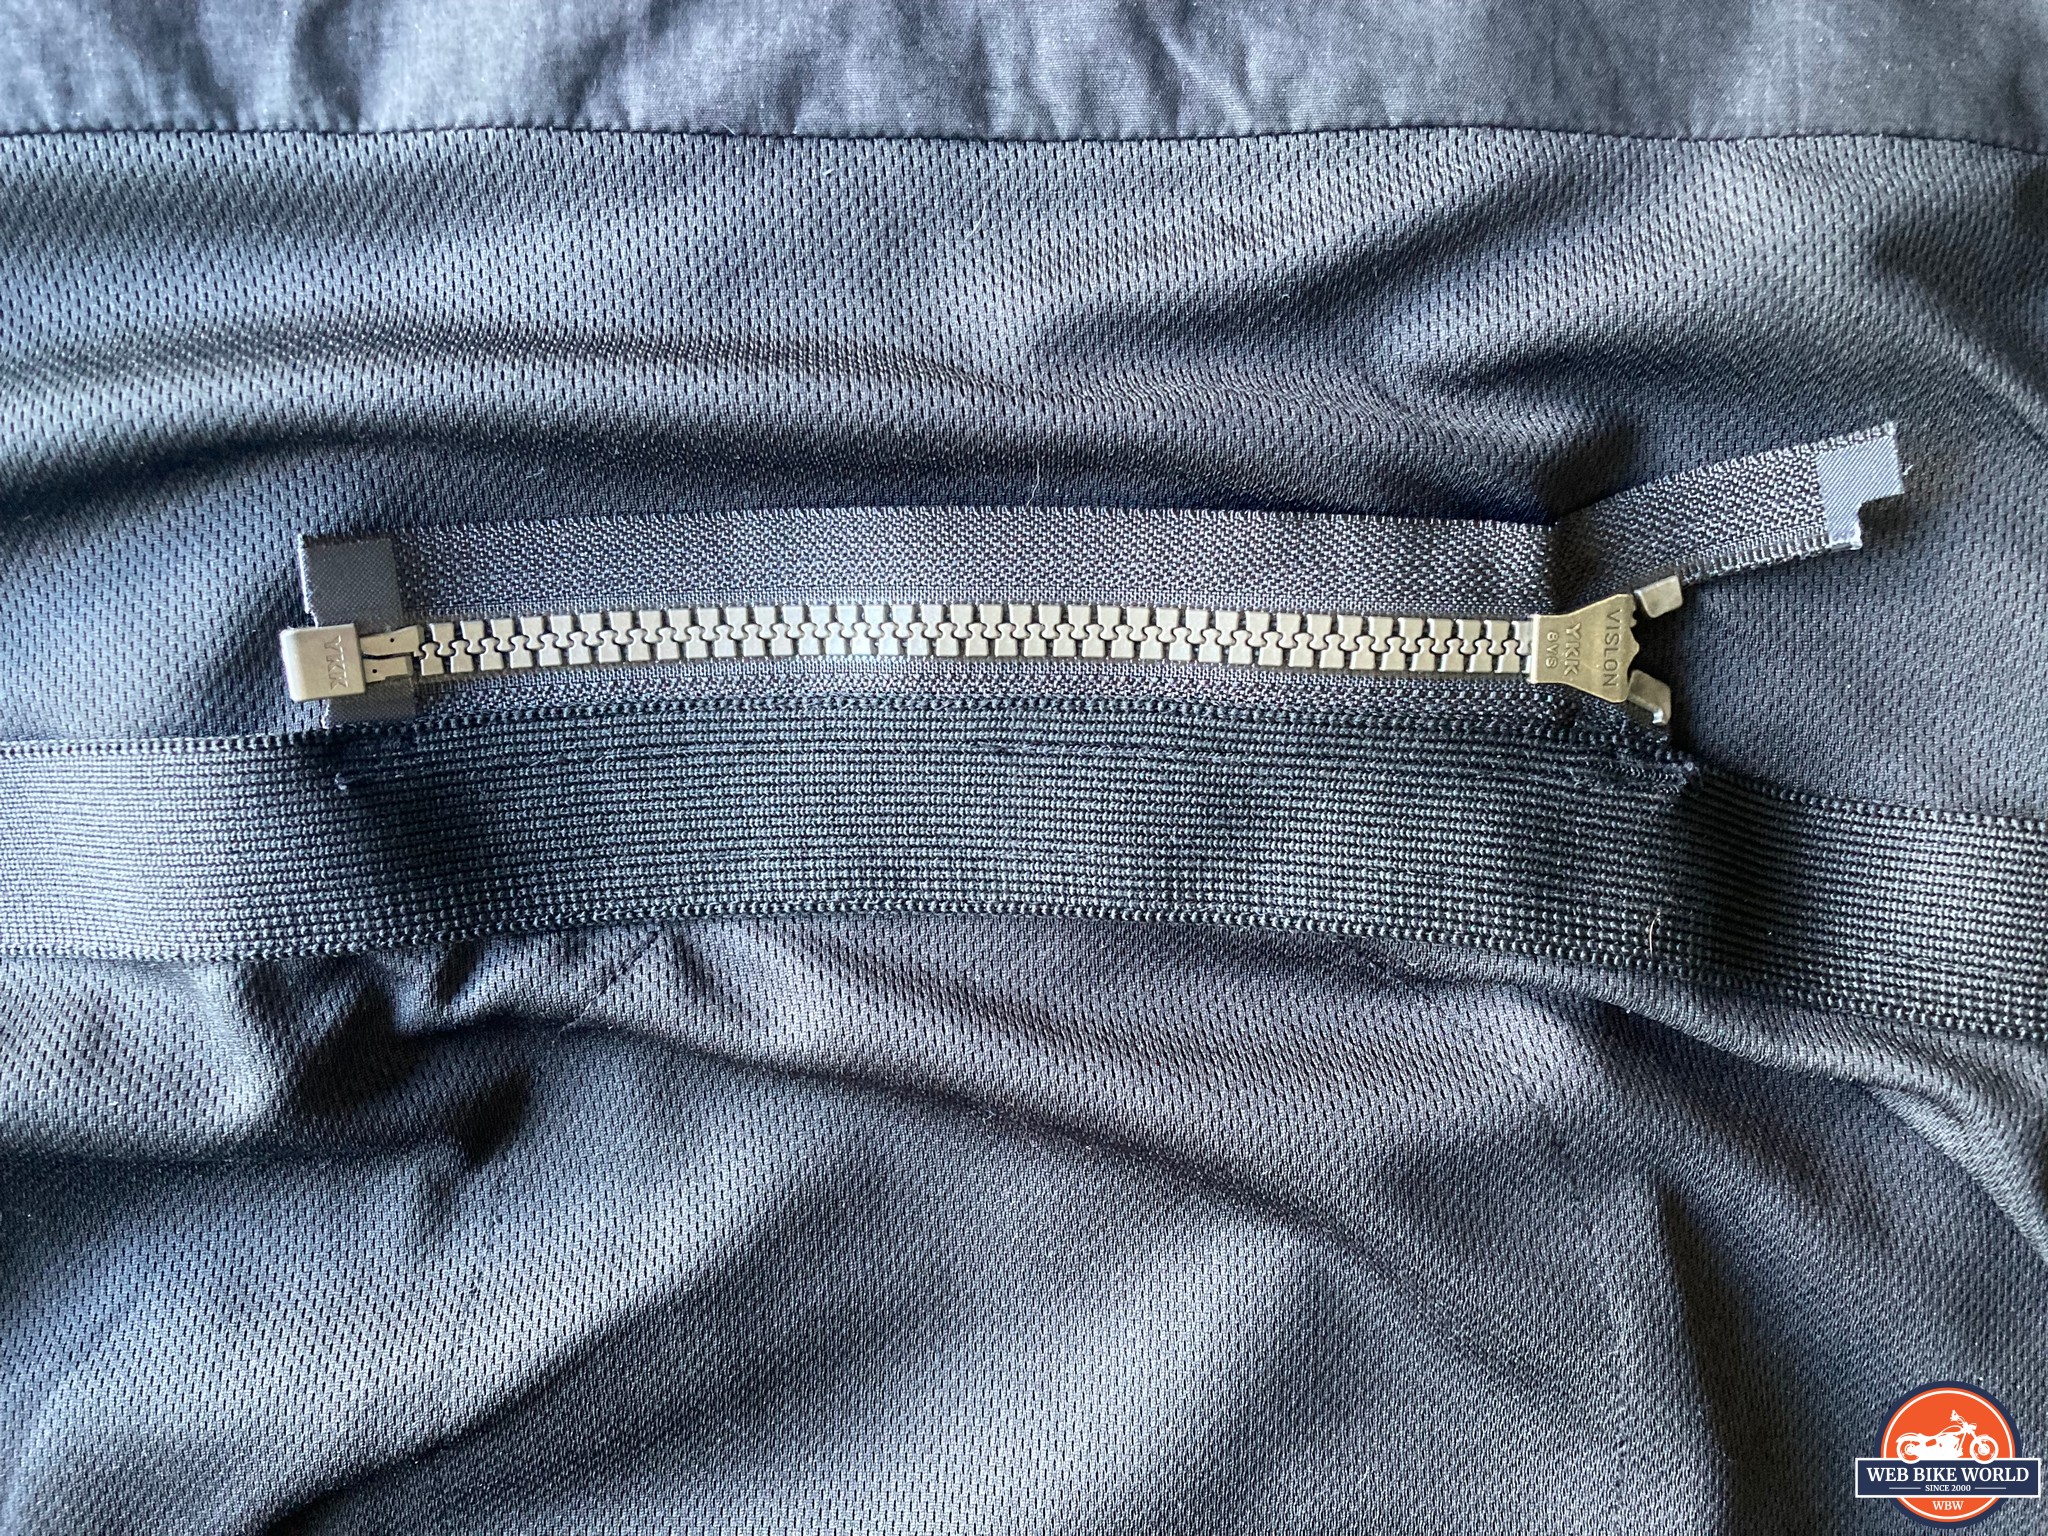 Closeup of the connection zipper